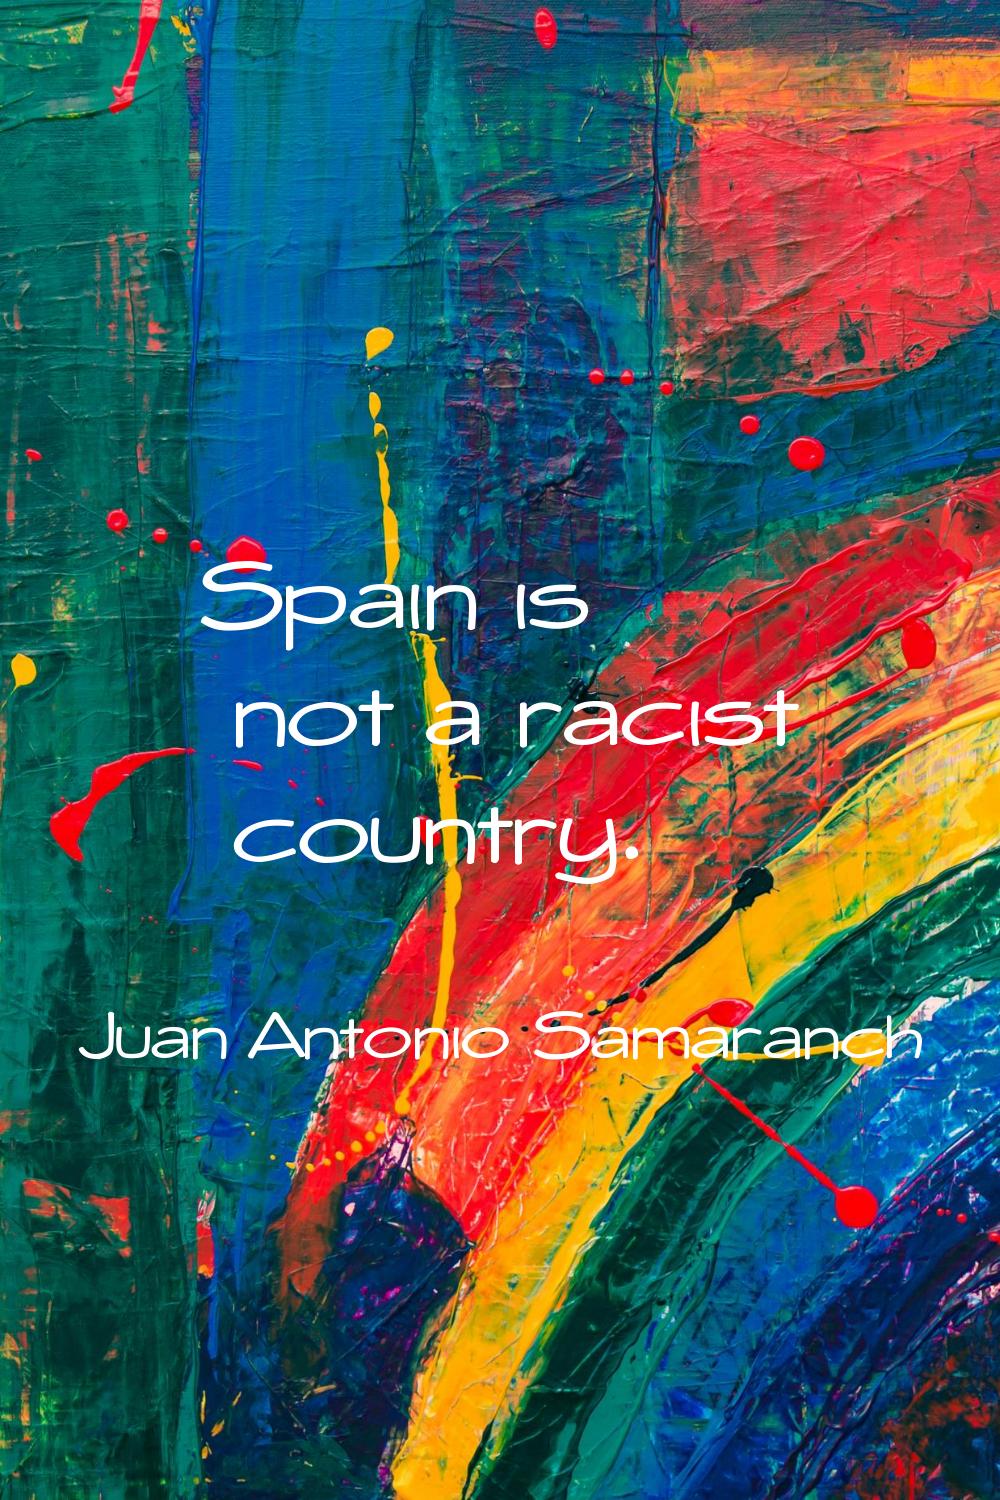 Spain is not a racist country.